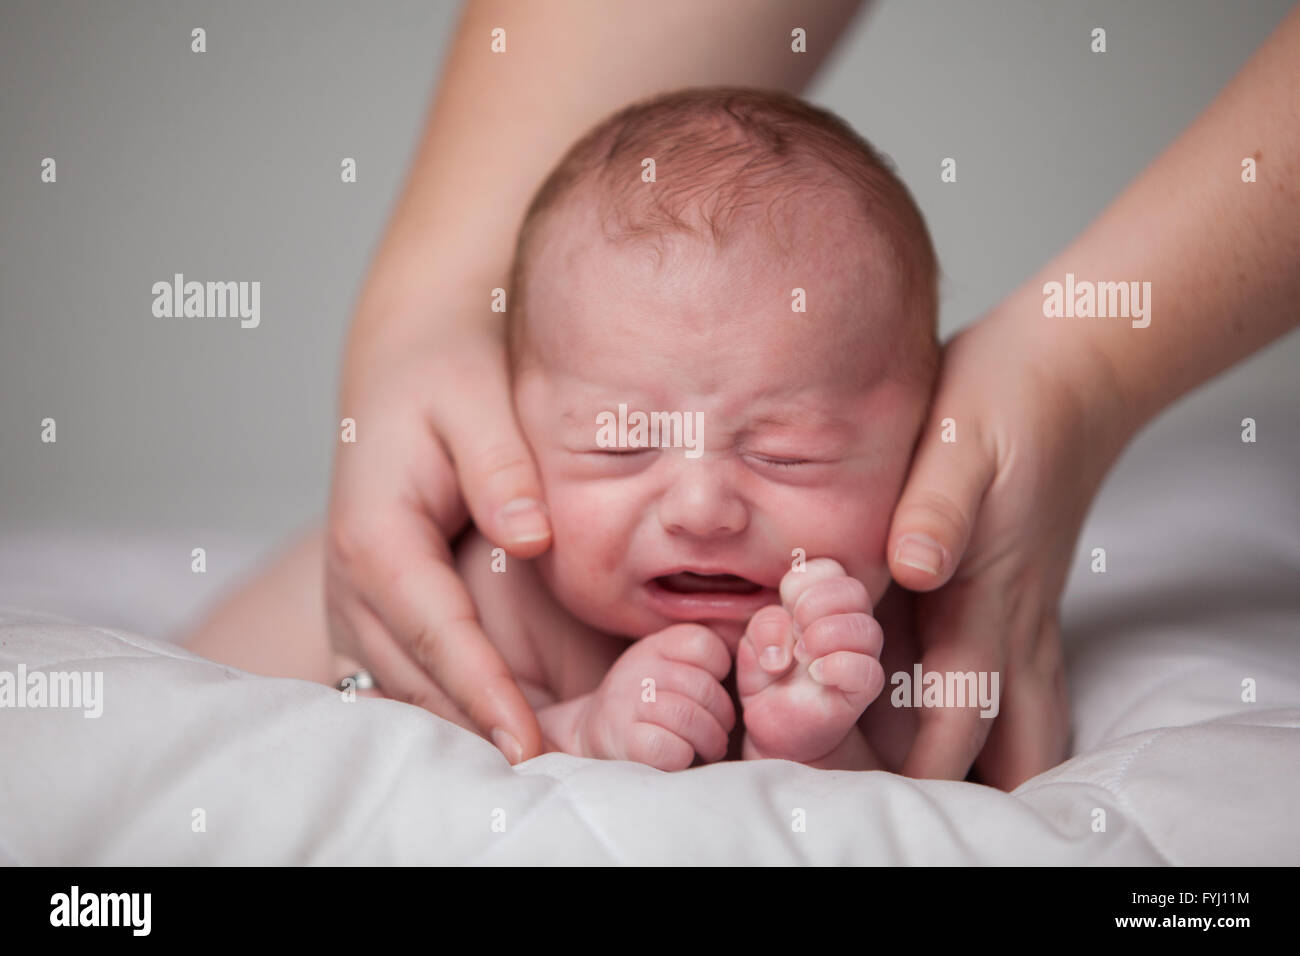 Baby is crying Stock Photo